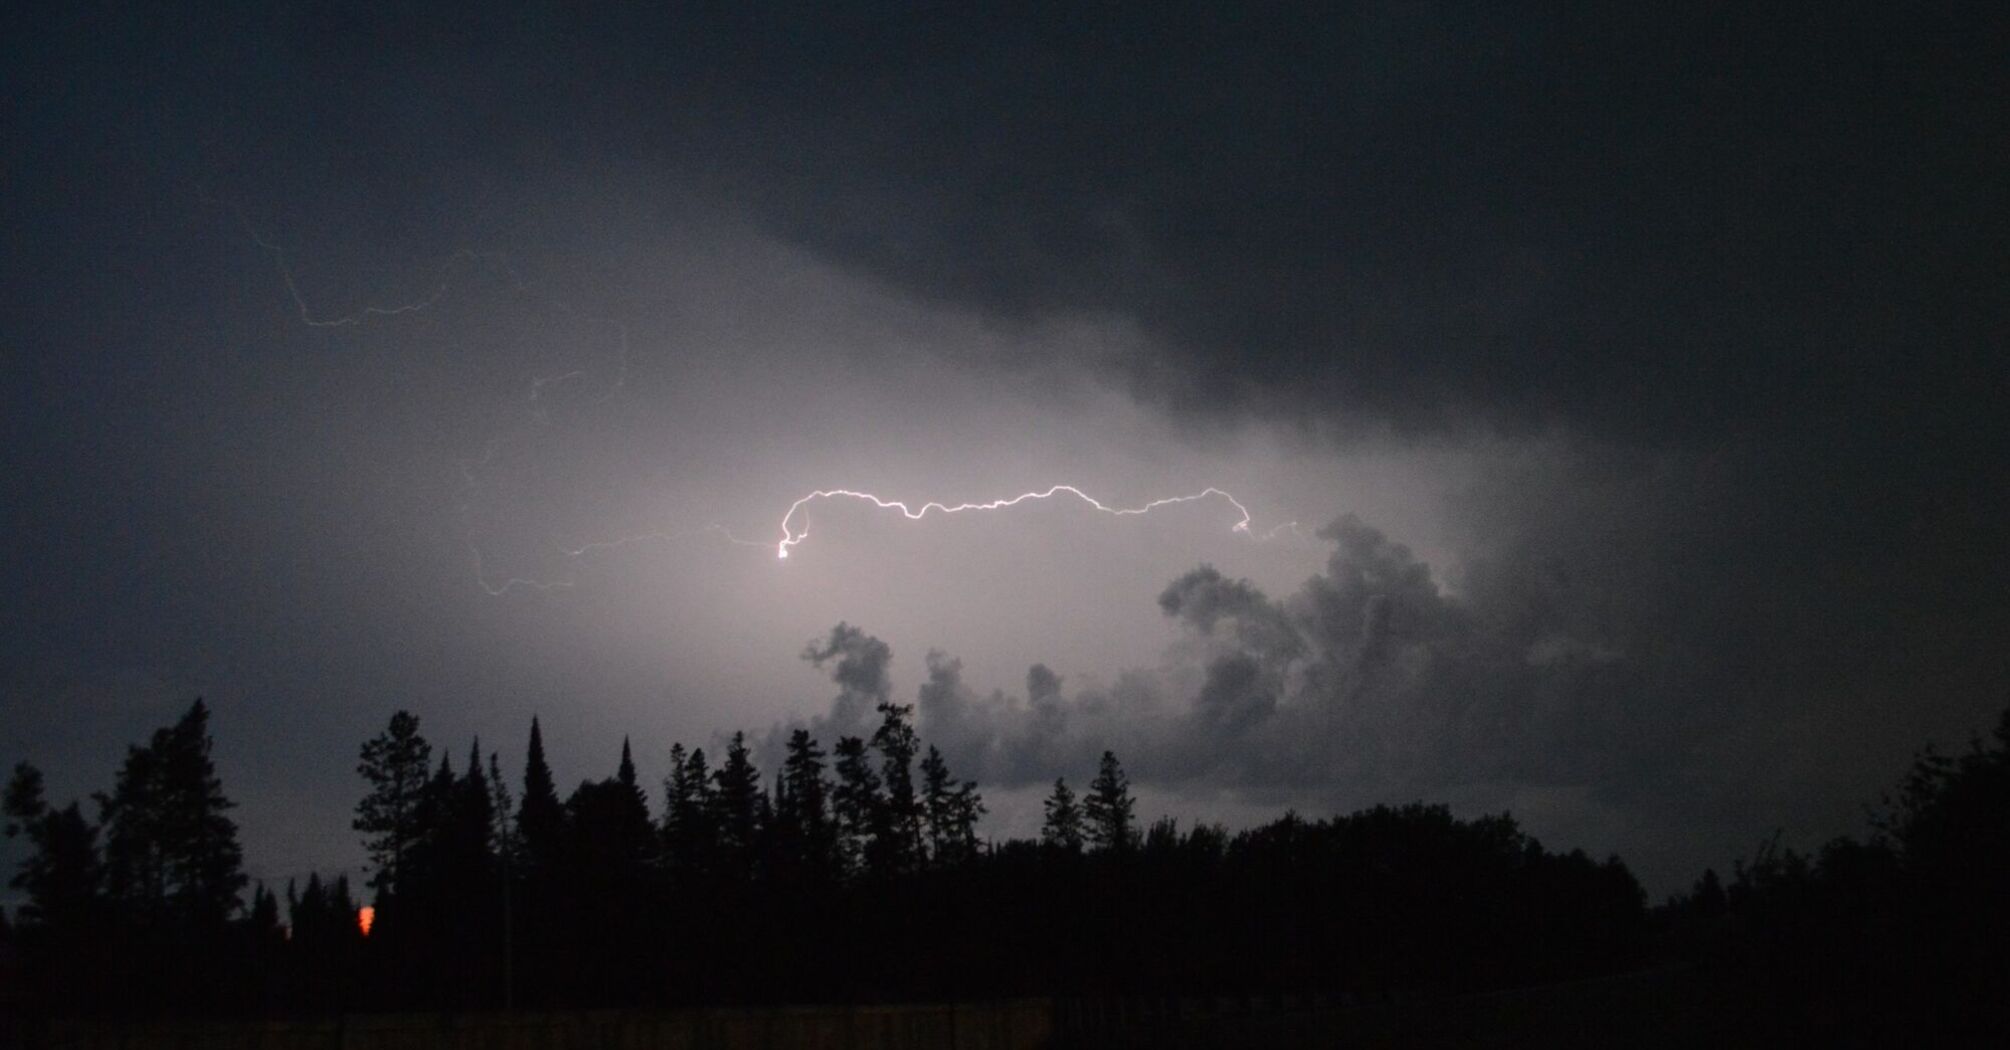 A dark stormy sky illuminated by a streak of lightning, with silhouettes of trees in the foreground